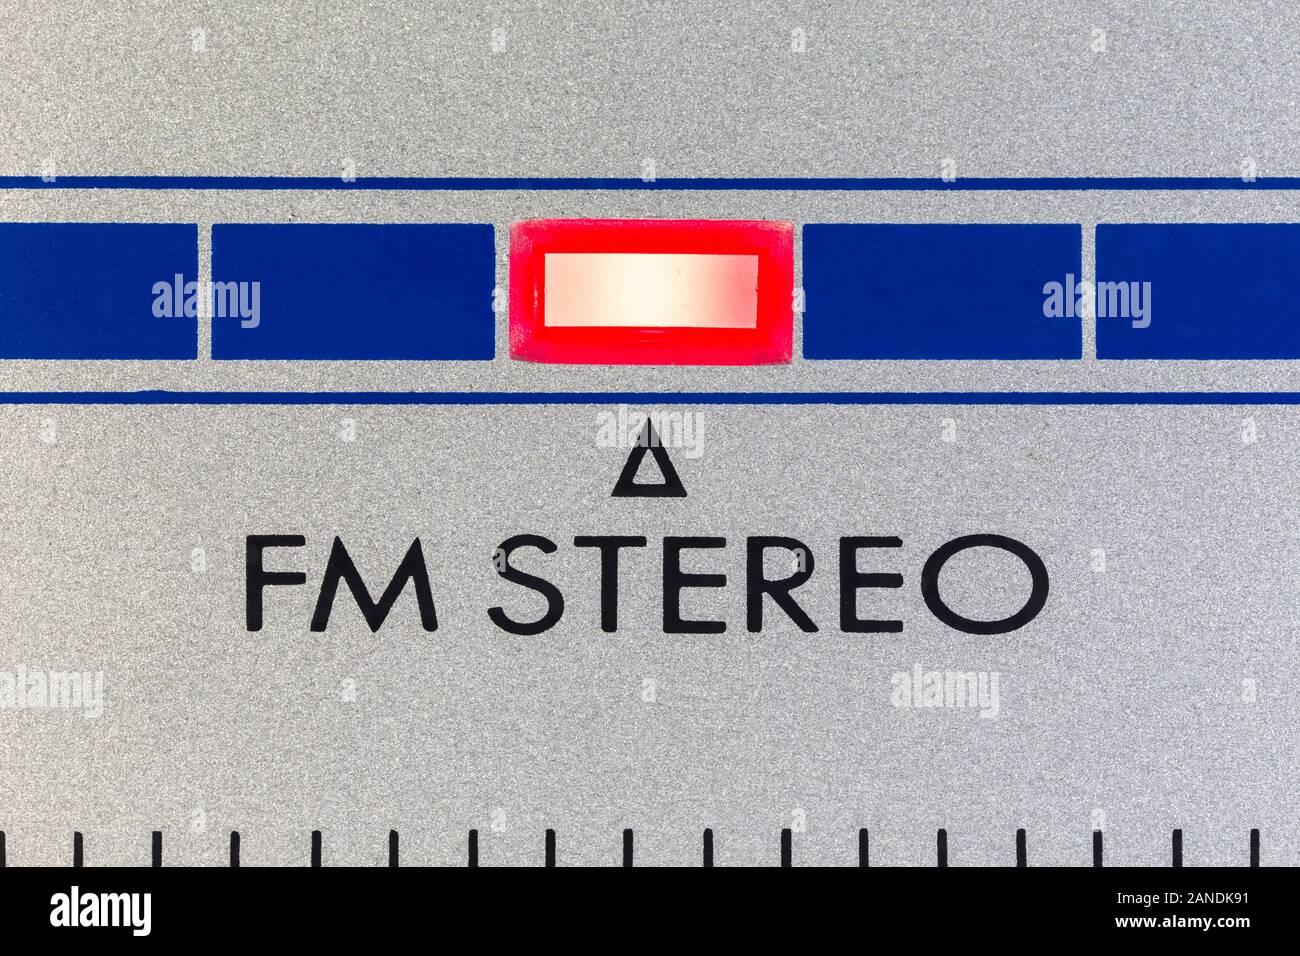 Macro close up photograph of FM Stereo indicator light on vintage boombox. Stock Photo